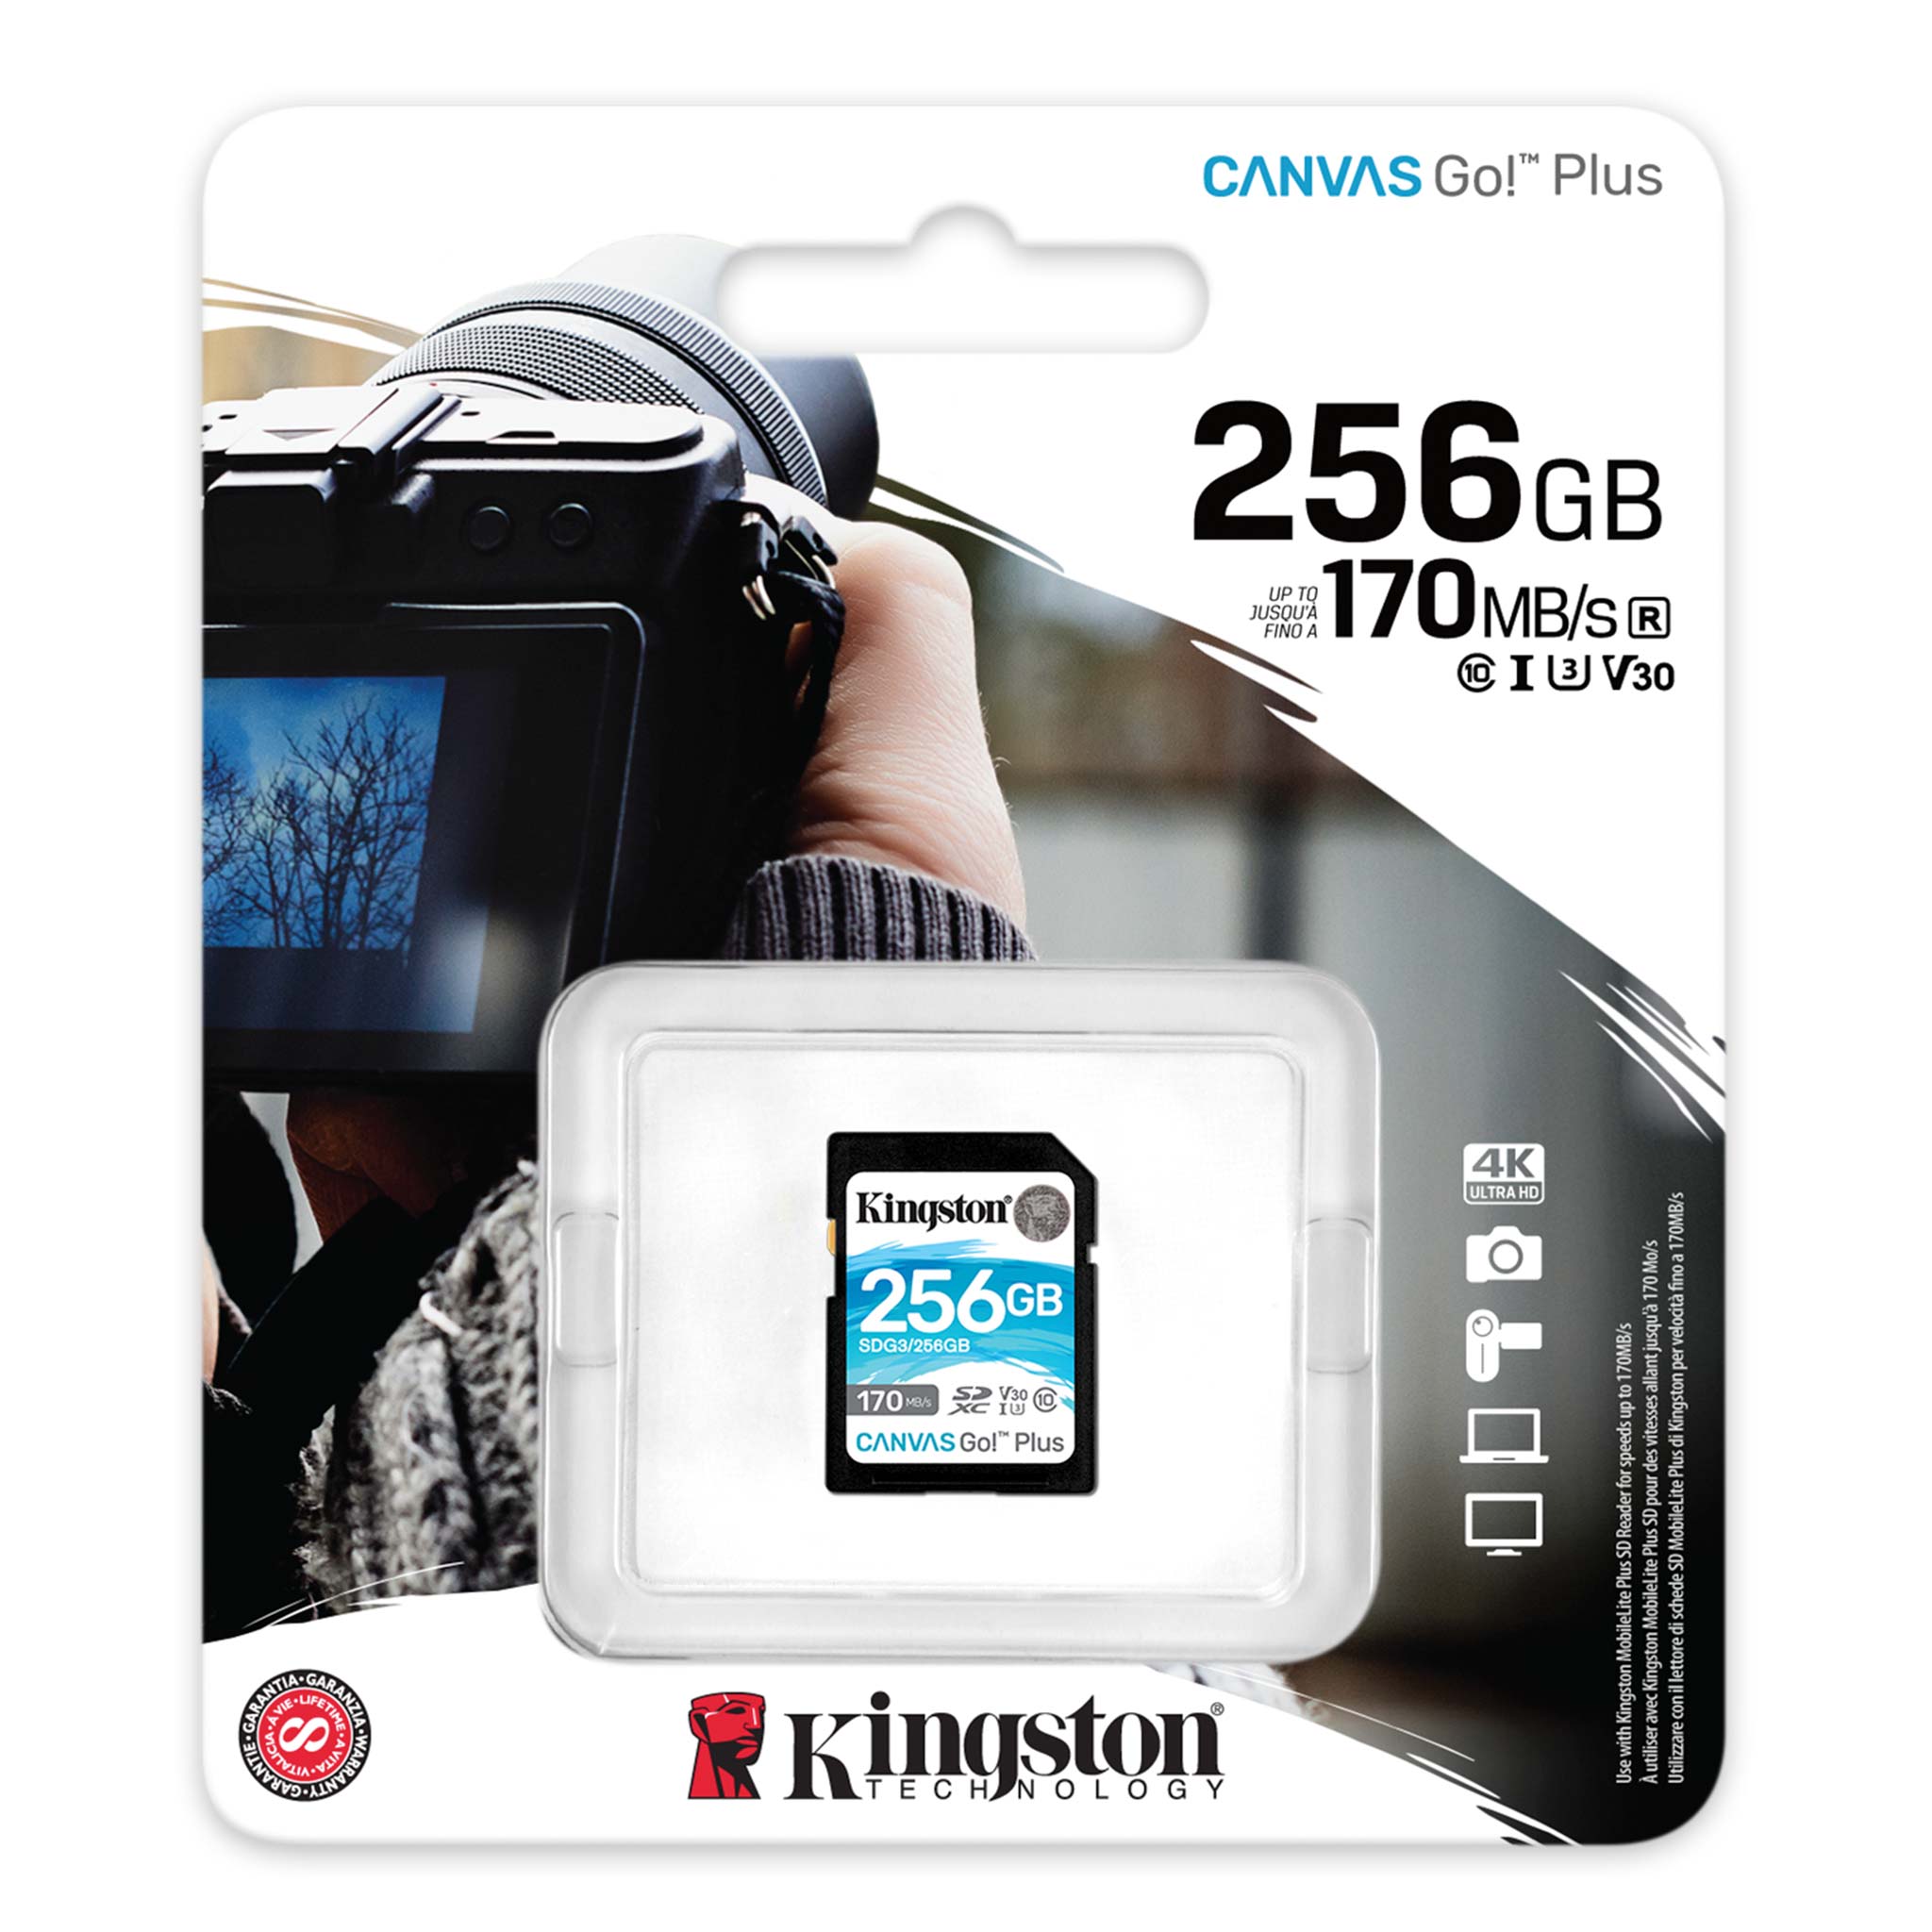 100MBs Works with Kingston Kingston 64GB ZTE Tempo MicroSDXC Canvas Select Plus Card Verified by SanFlash. 